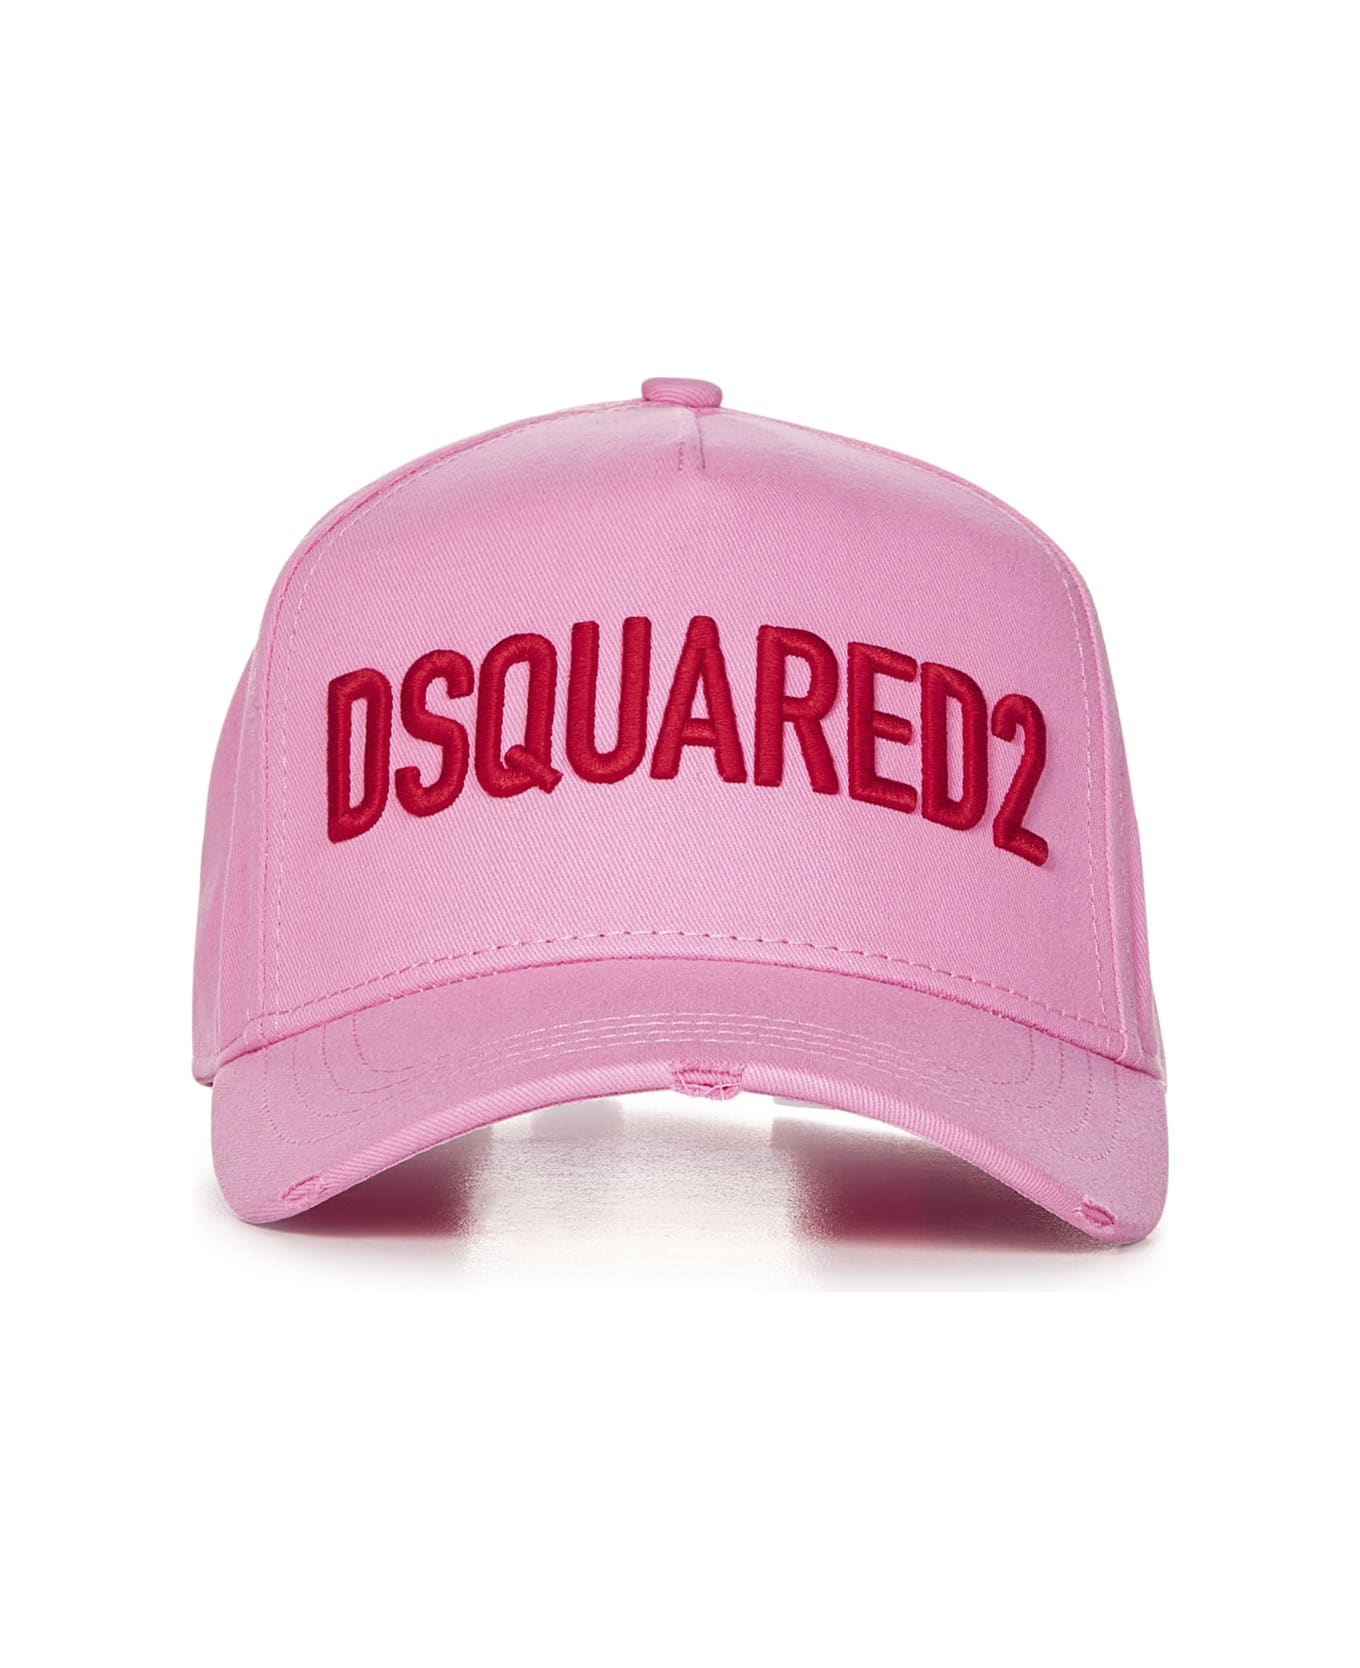 Dsquared2 Dquared2 Hat - Pink 帽子